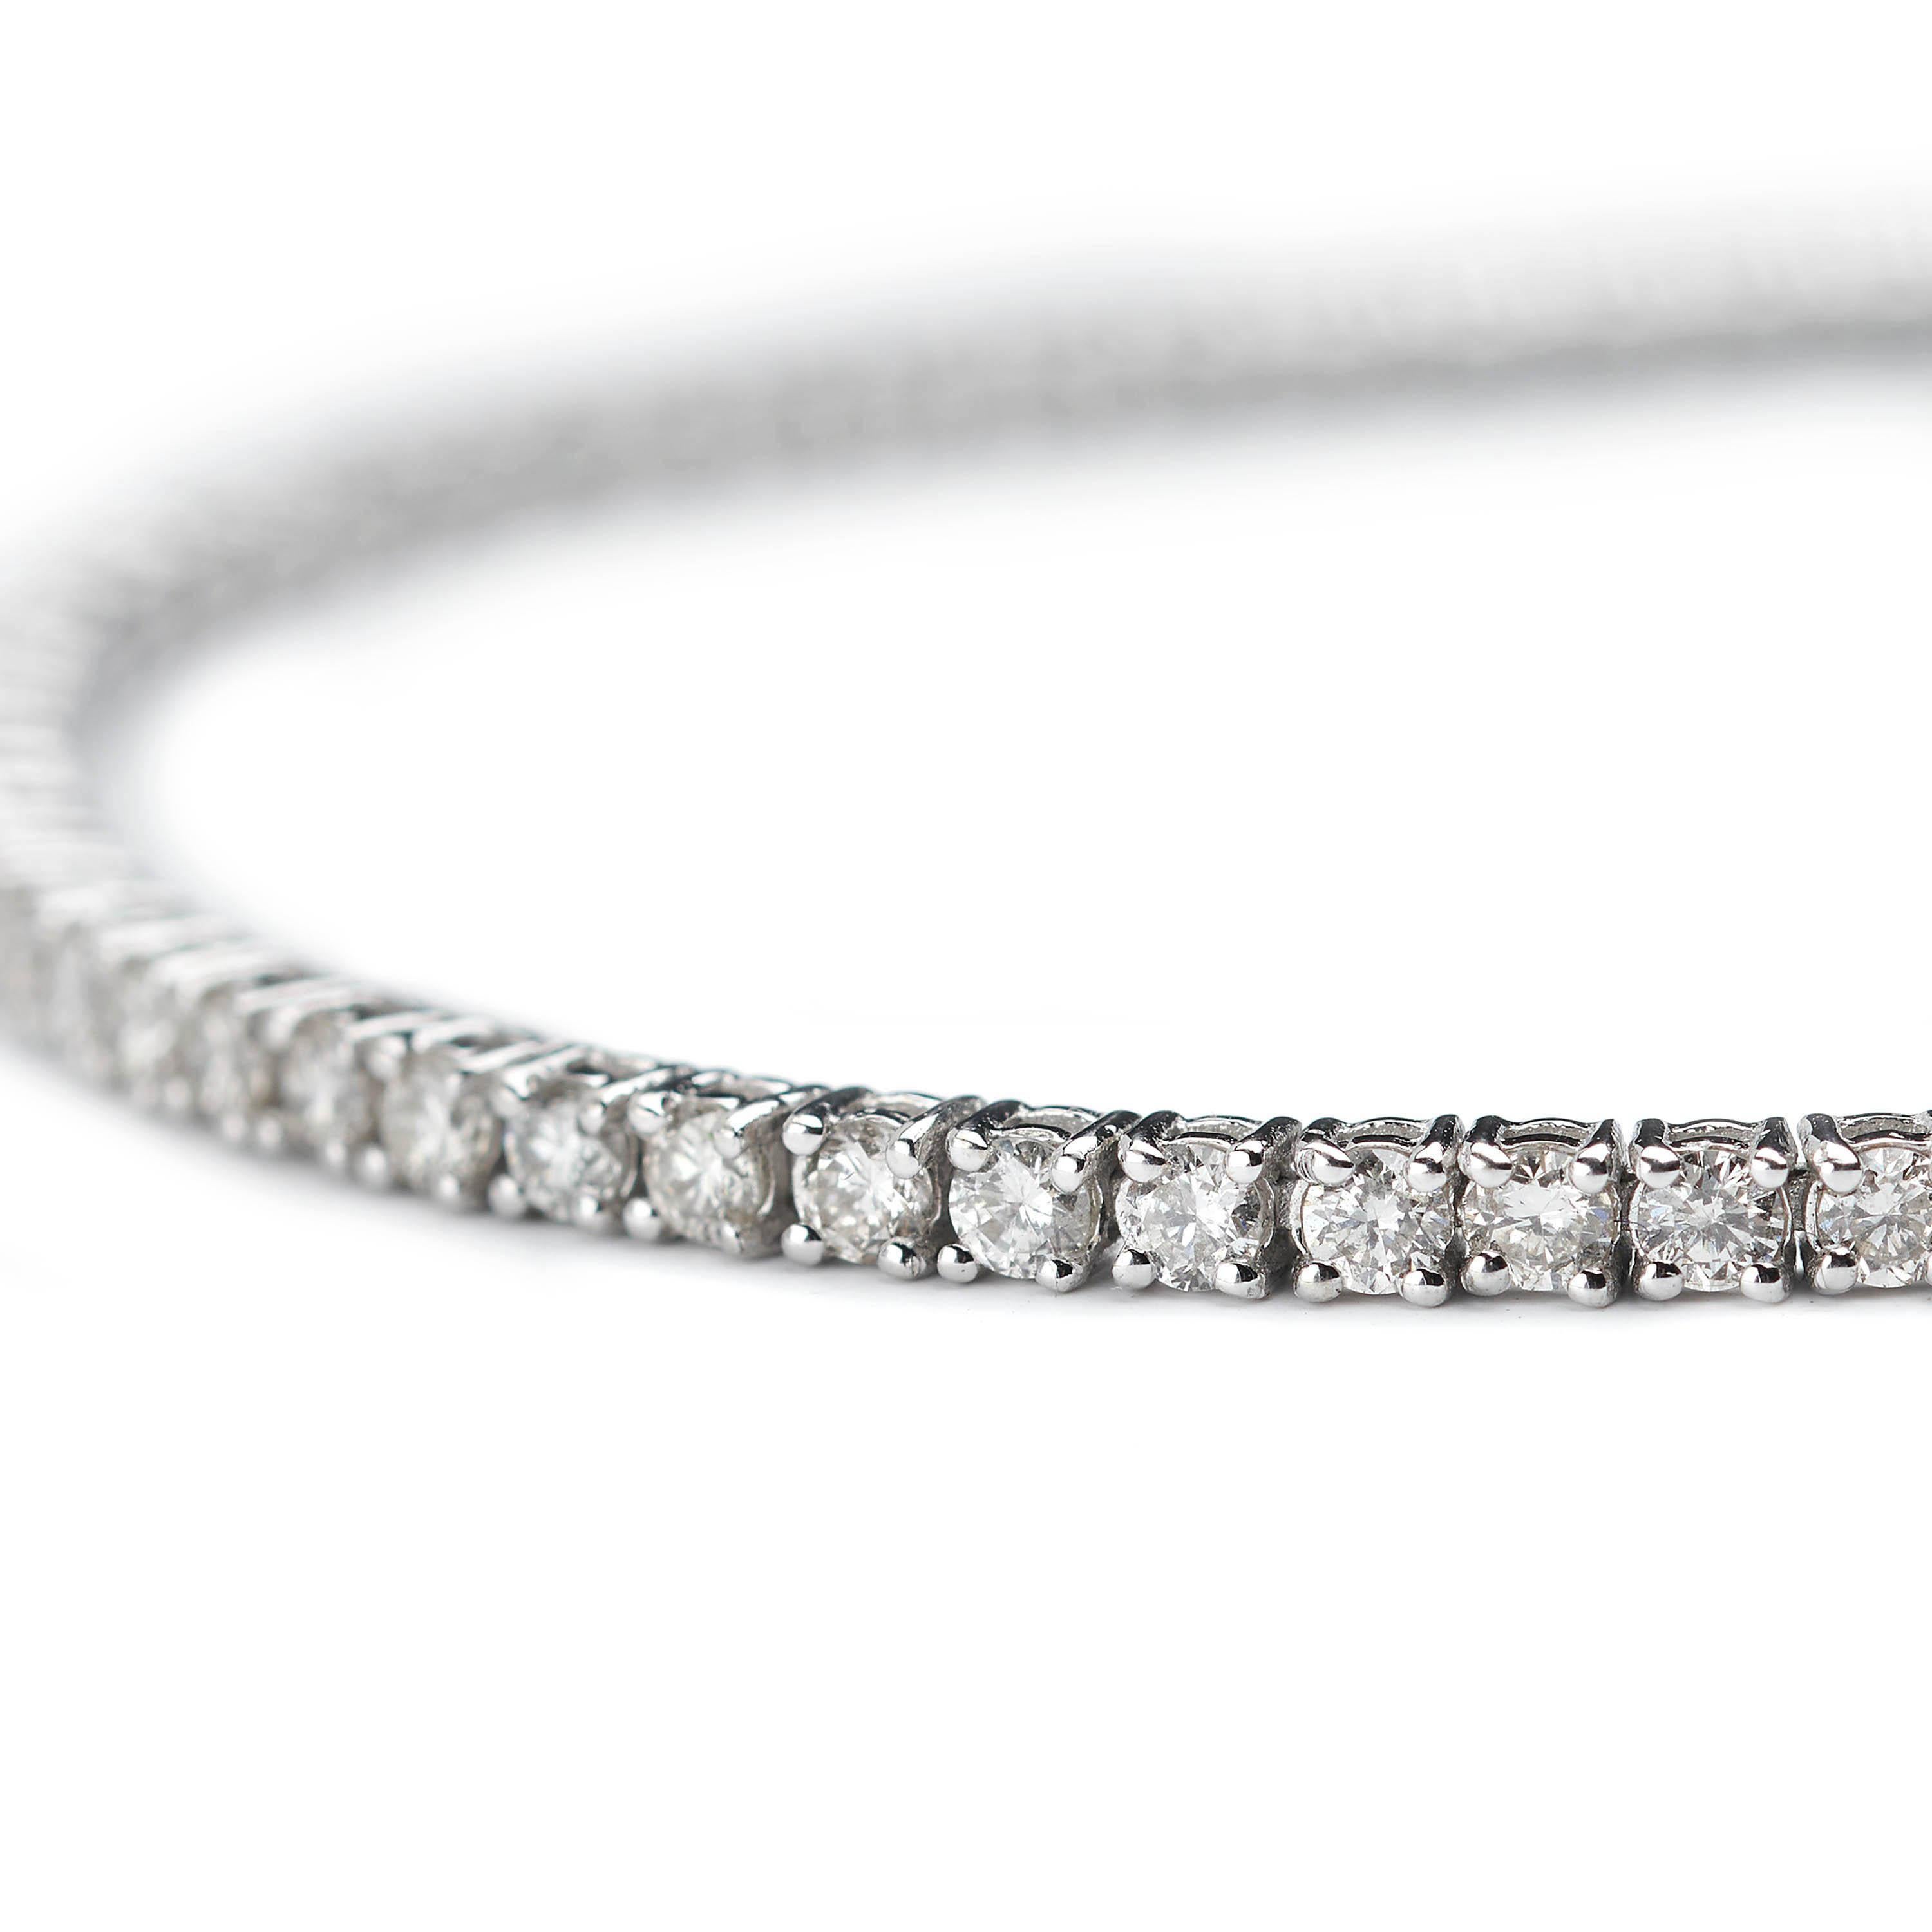 A diamond line bracelet, set with approximately 2.50ct of round brilliant-cut diamonds, in claw settings, mounted in 18ct white gold.